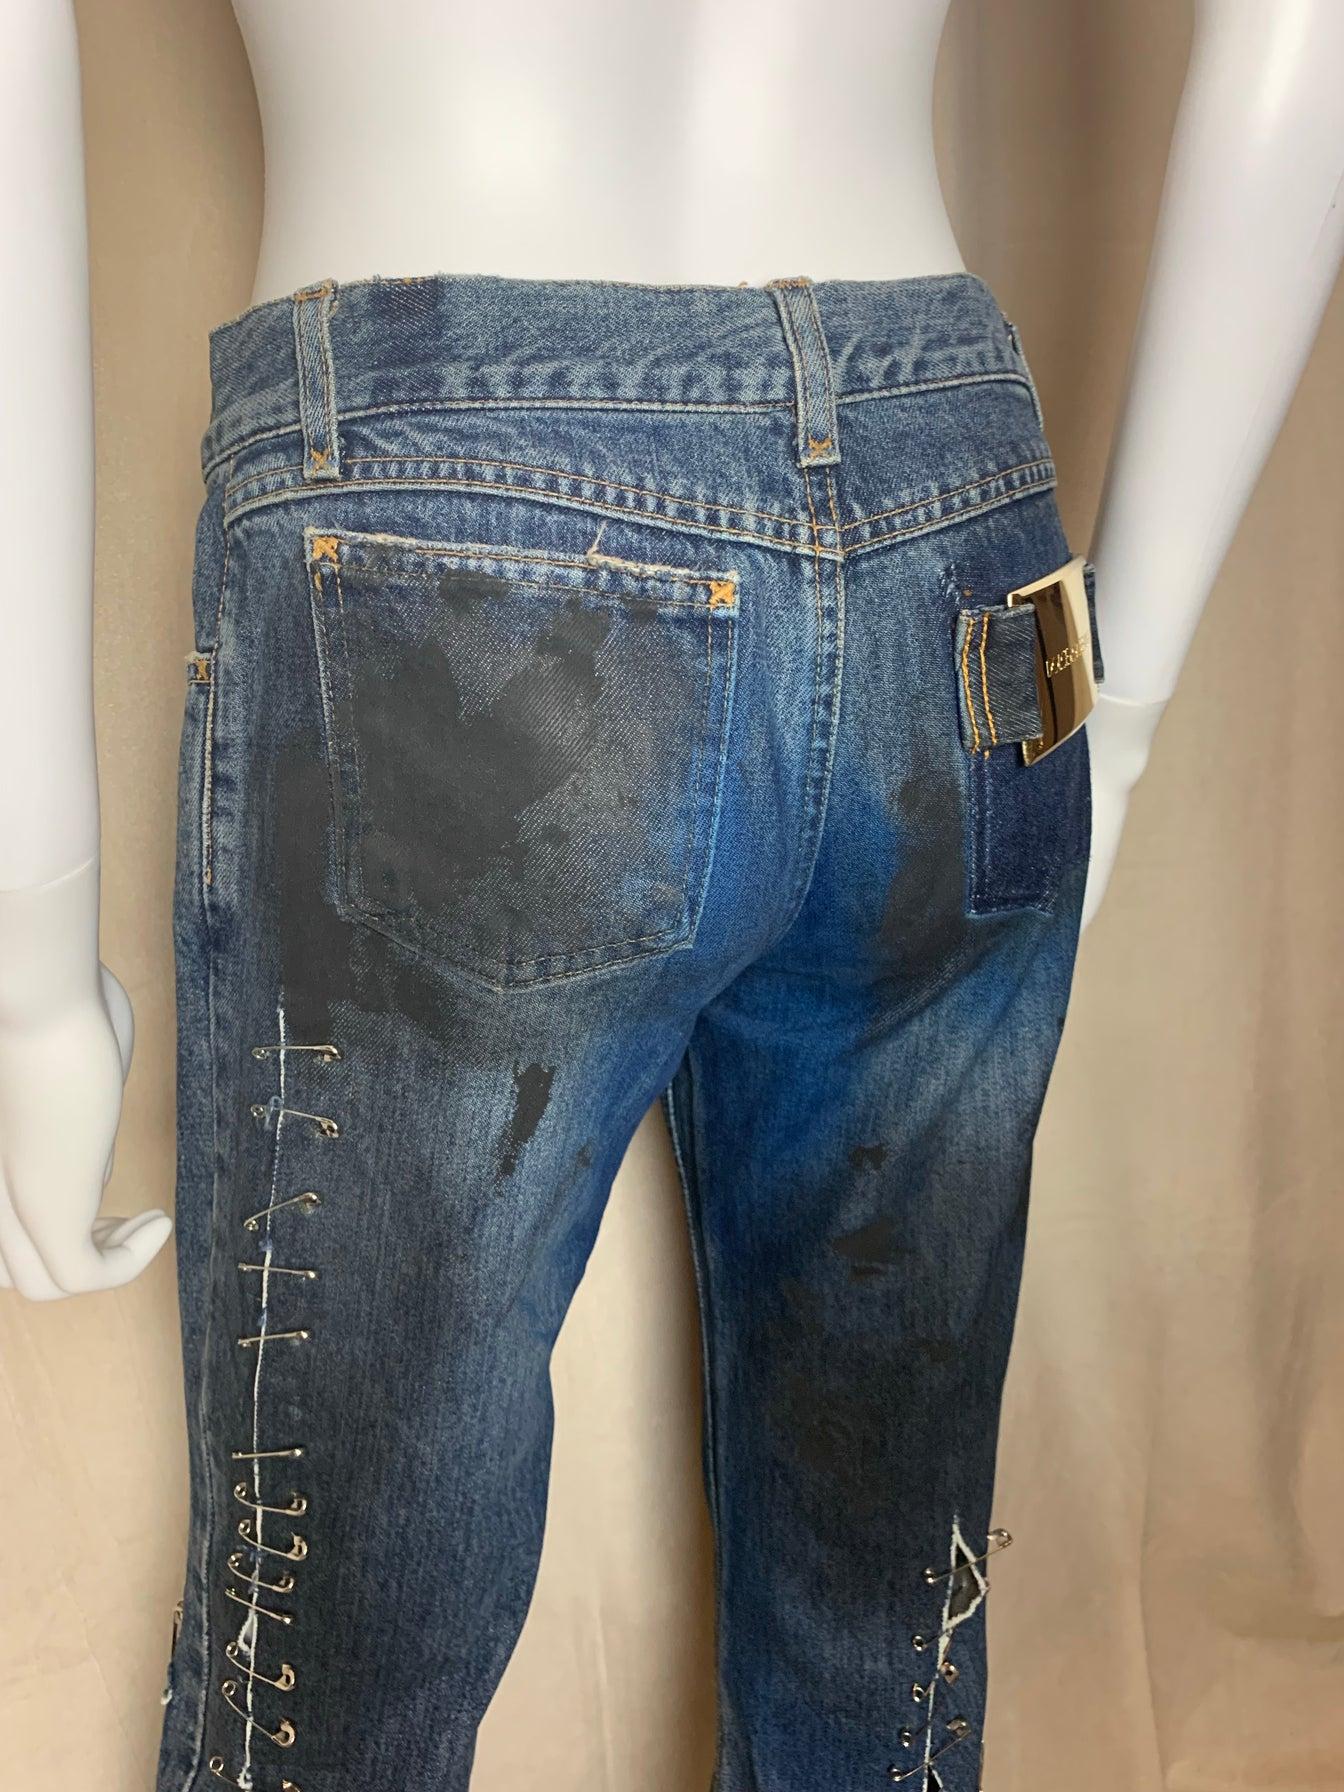 Dolce & Gabbana SS 2001 Graffiti Punk Jeans with Safety Pins In New Condition In Avon, CT